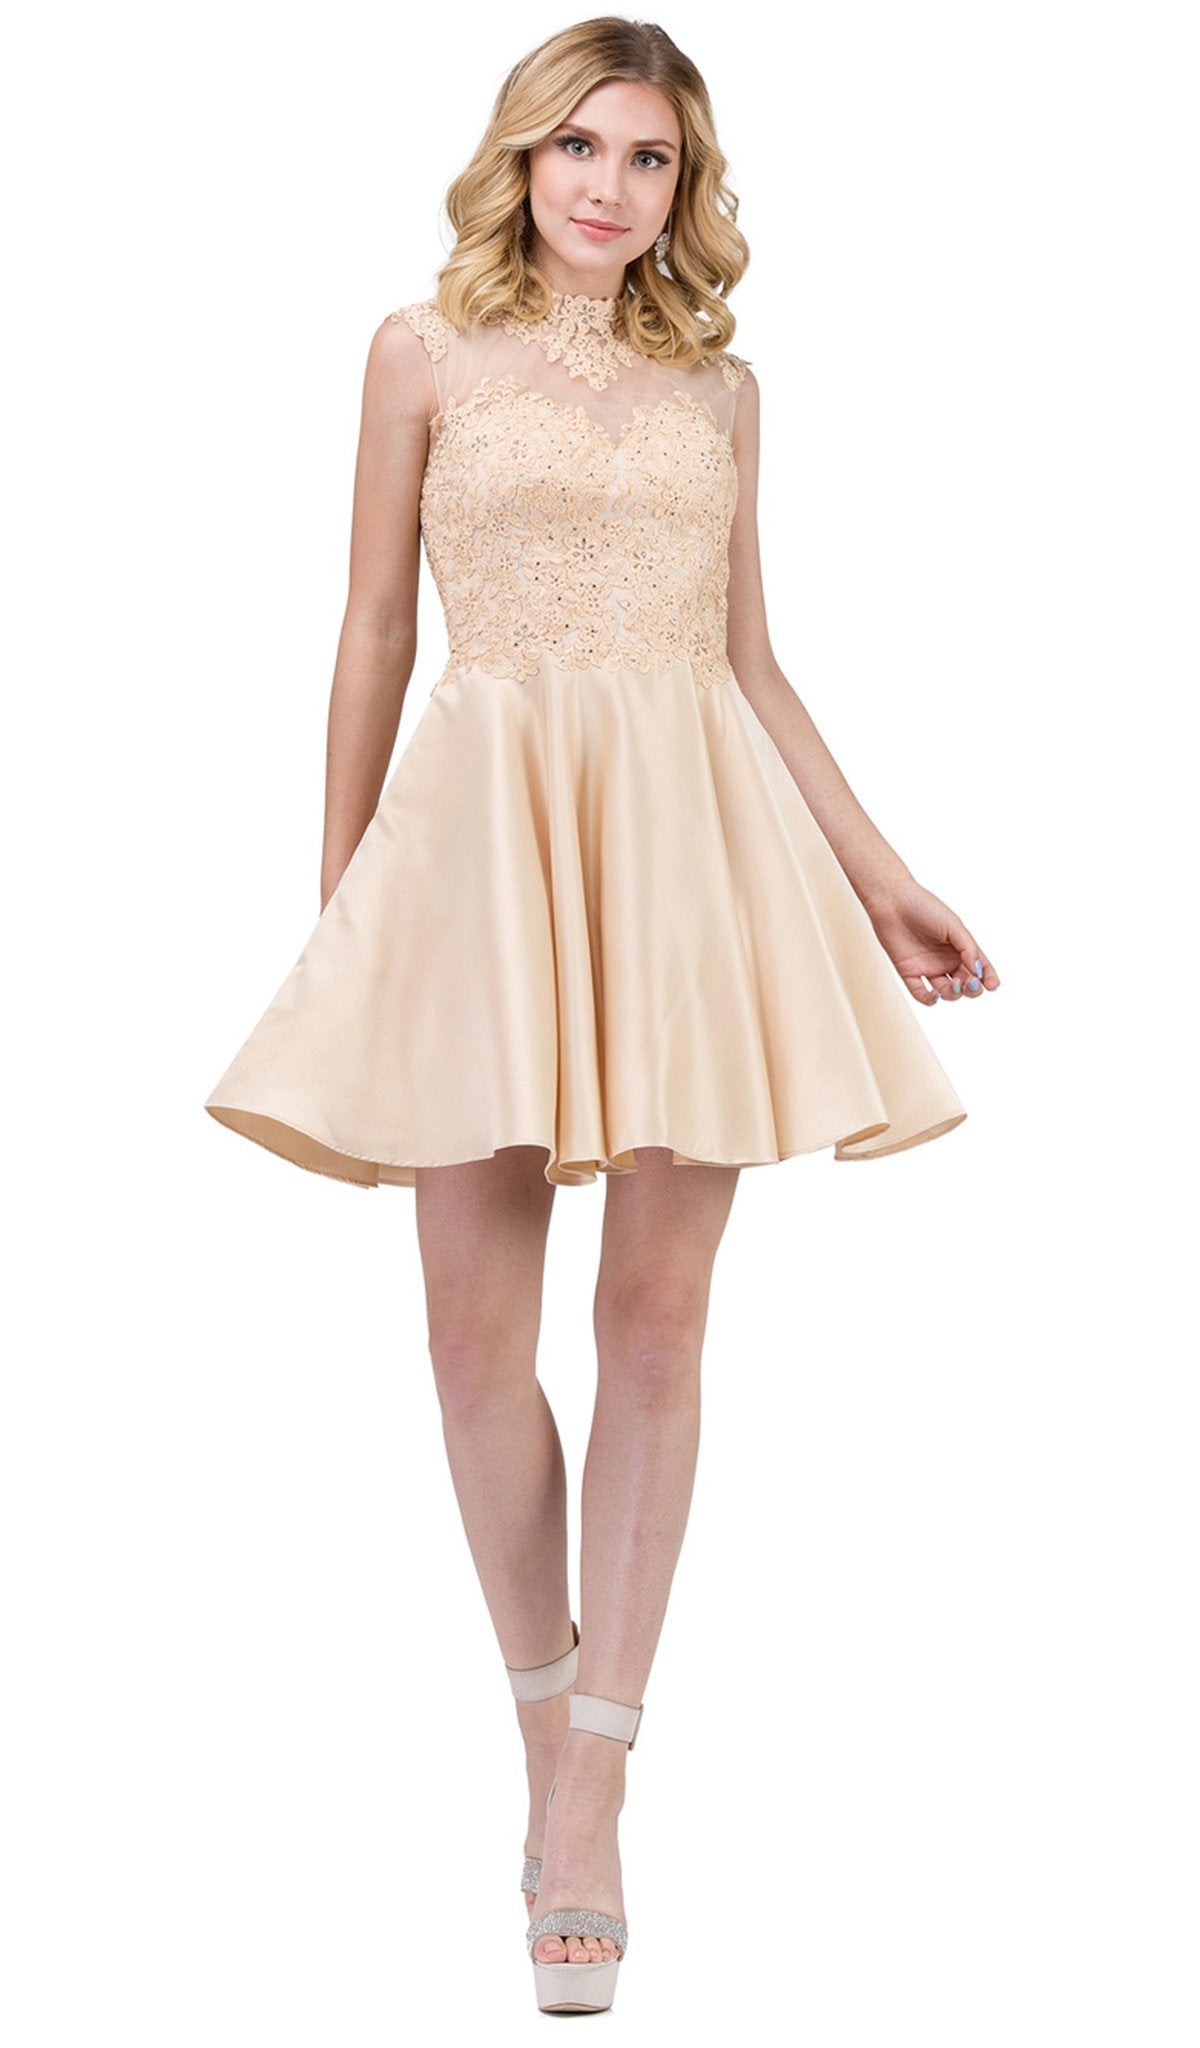 Dancing Queen - 3069 Appliqued Illusion High Neck Homecoming Dress Homecoming Dresses XS / Champagne